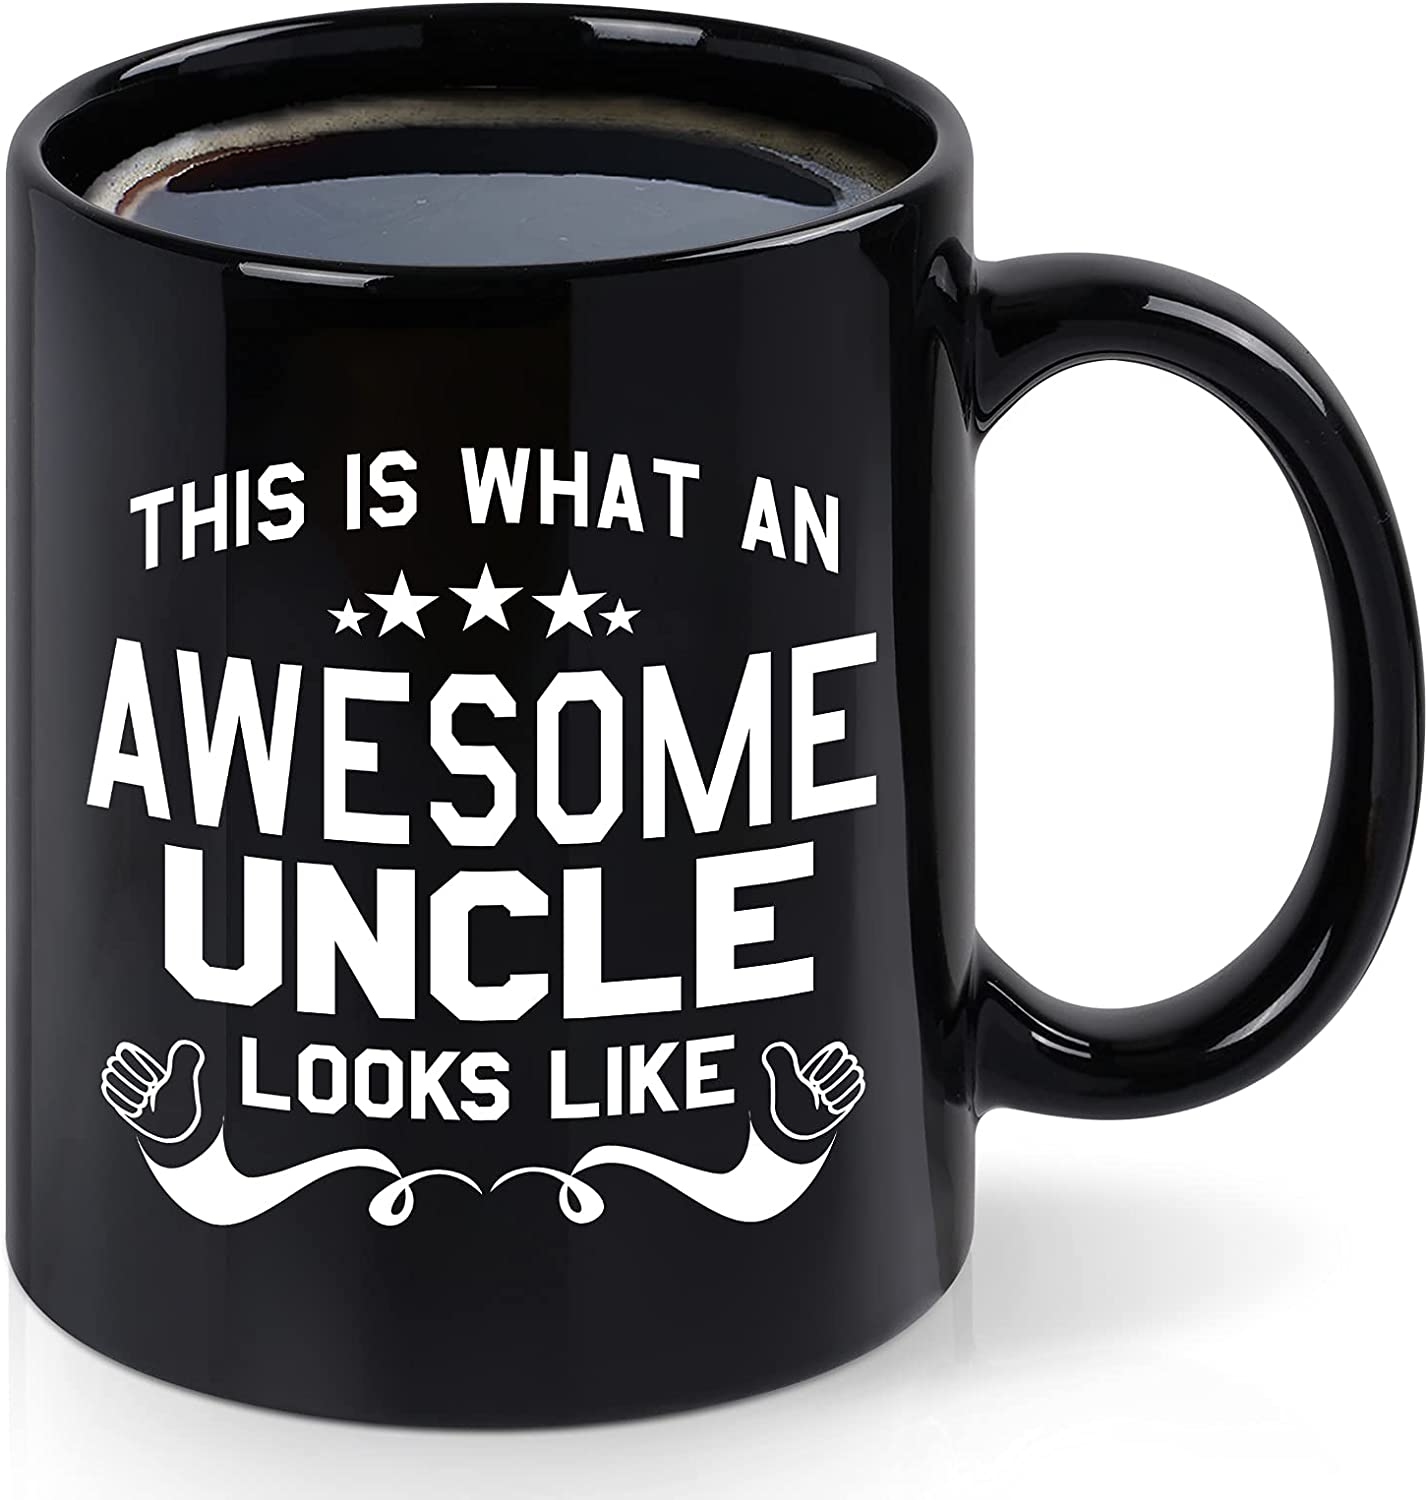 The Perfect Father's Day Gifts for That Special Uncle!